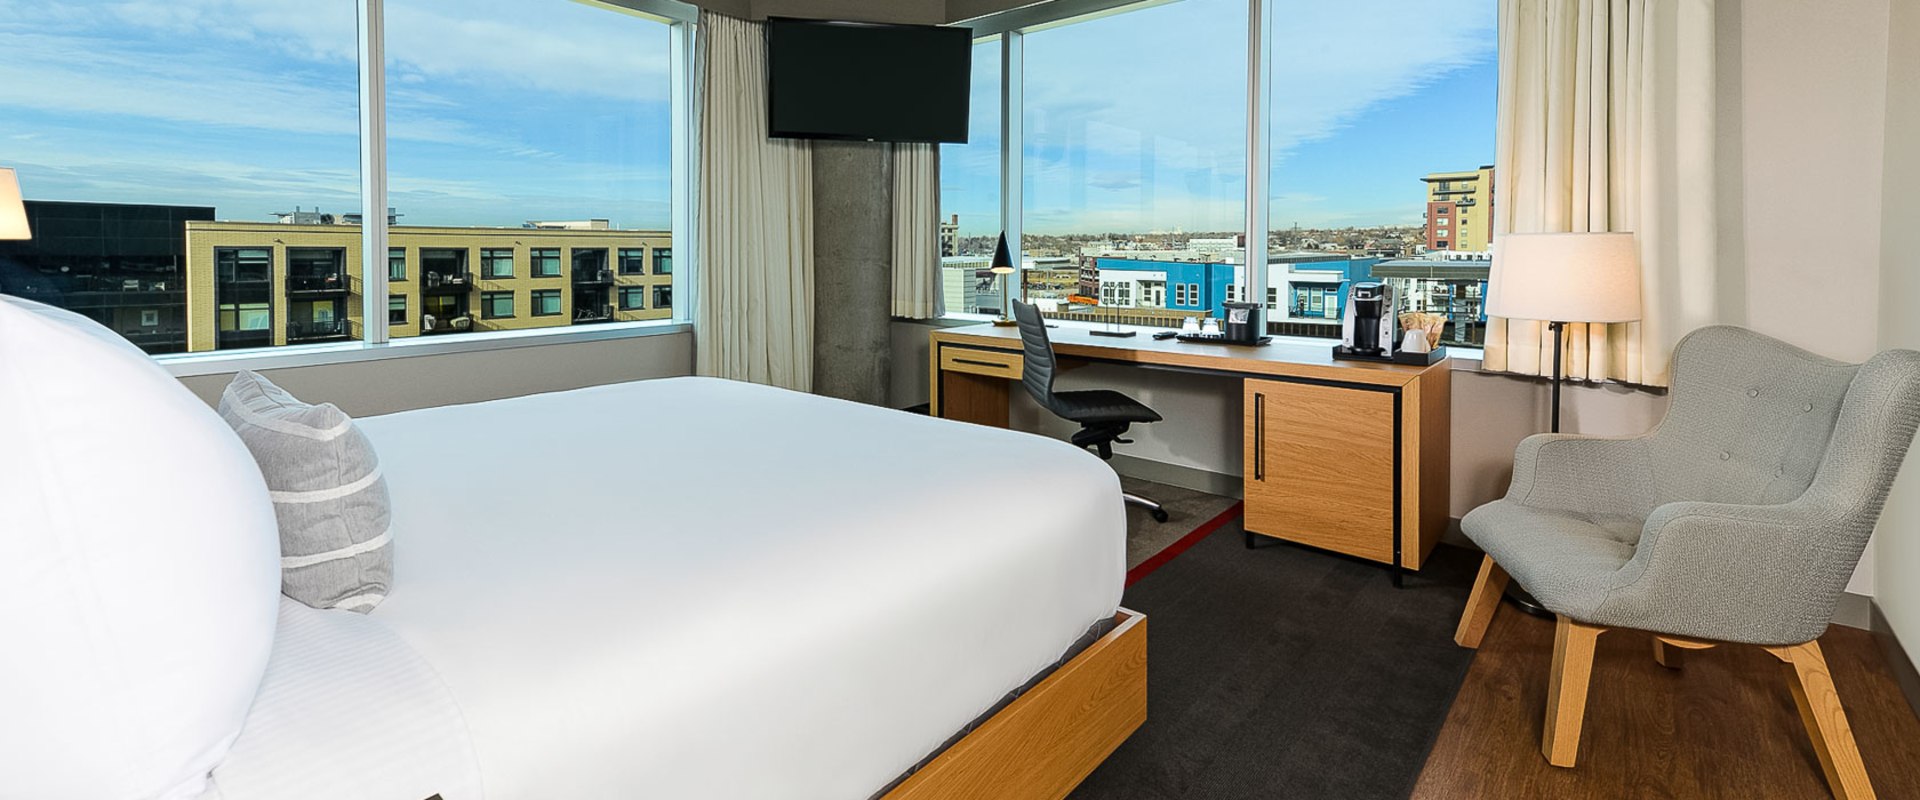 Where to Find Suites with Free Wi-Fi in Denver, Colorado